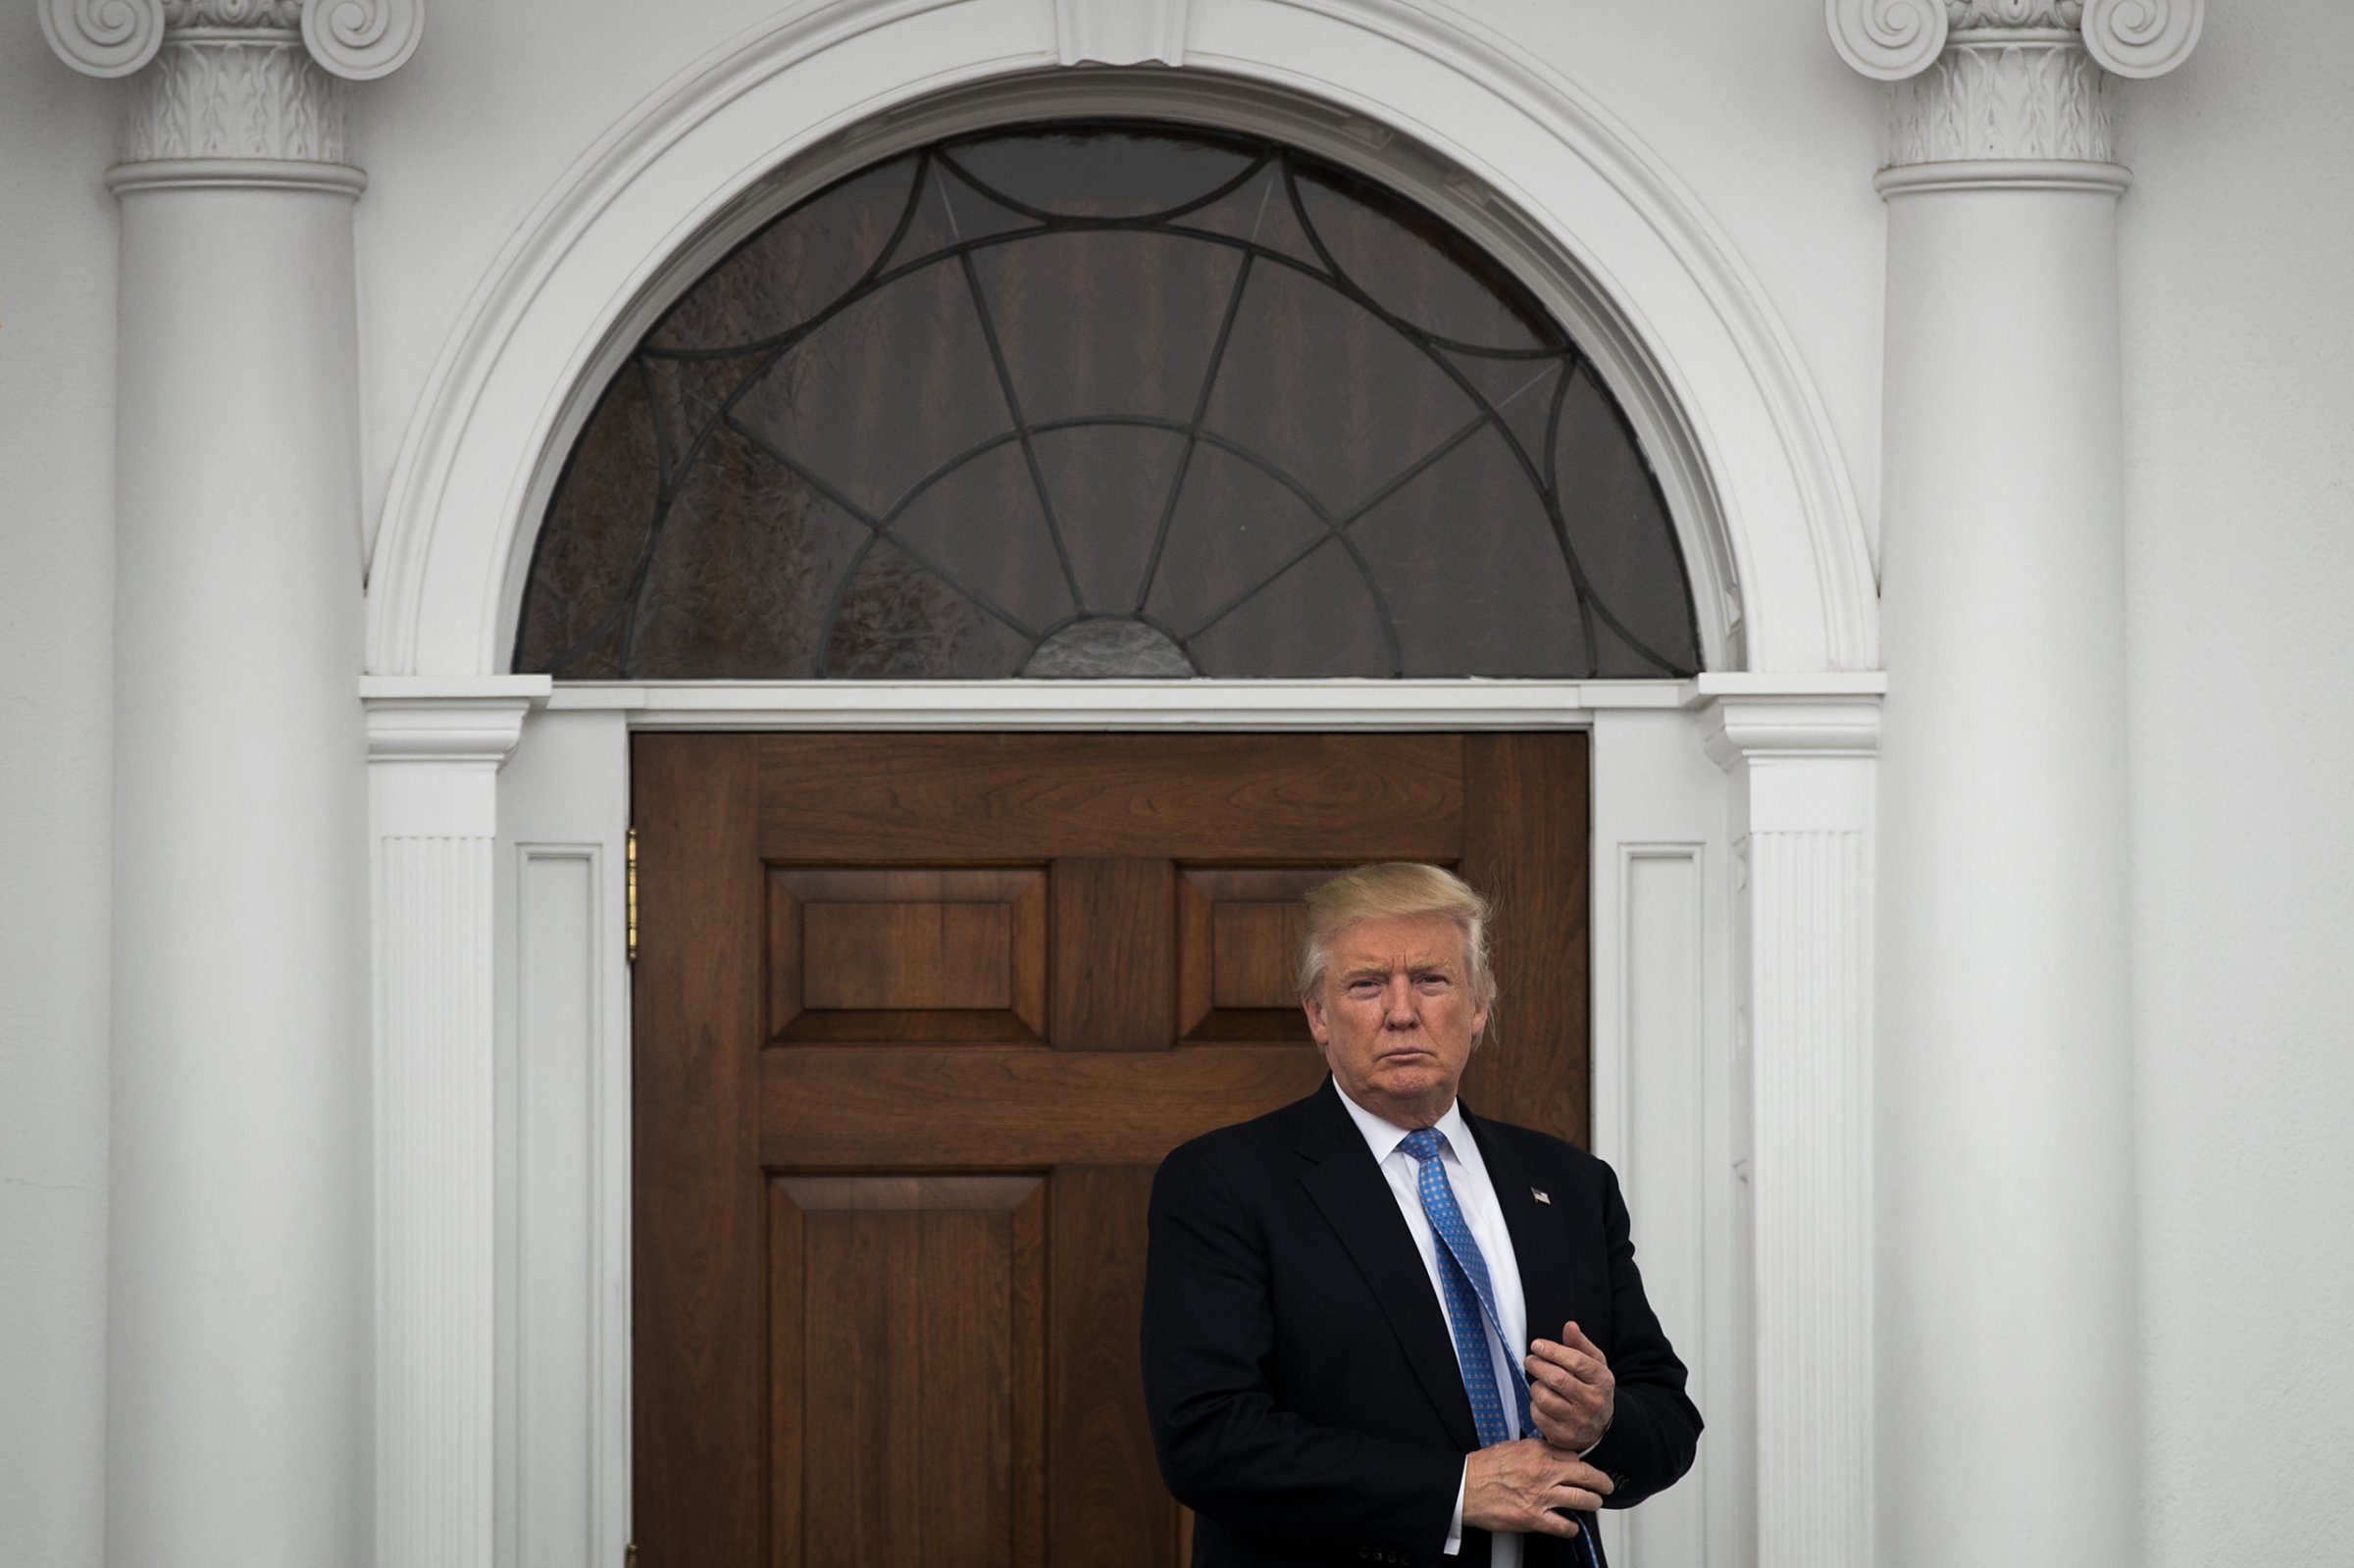 BEDMINSTER TOWNSHIP, NJ - NOVEMBER 20: President-elect Donald Trump stands outside the clubhouse following his meeting with Peter Kirsanow, attorney and member of the U.S. Commission on Civil Rights, at Trump International Golf Club, November 20, 2016 in Bedminster Township, New Jersey. Trump and his transition team are in the process of filling cabinet and other high level positions for the new administration. (Photo by Drew Angerer/Getty Images)